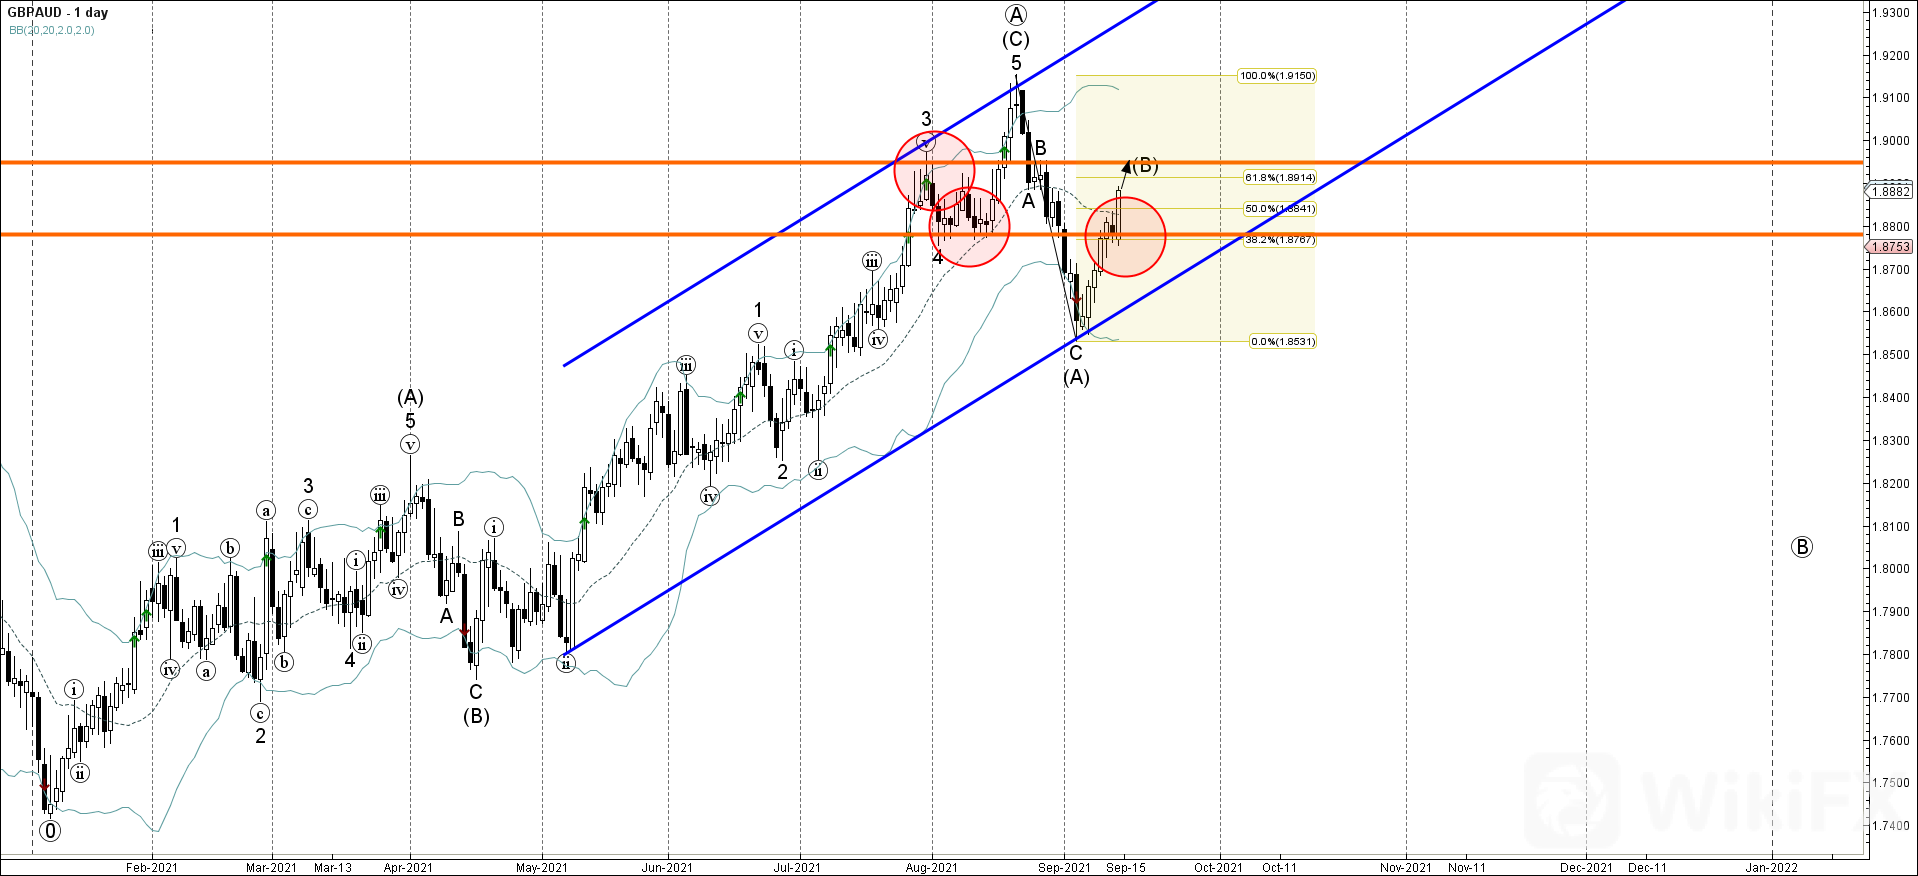 GBPAUD+-+Primary+Analysis+-+Sep-14+1023+AM+(1+day).png